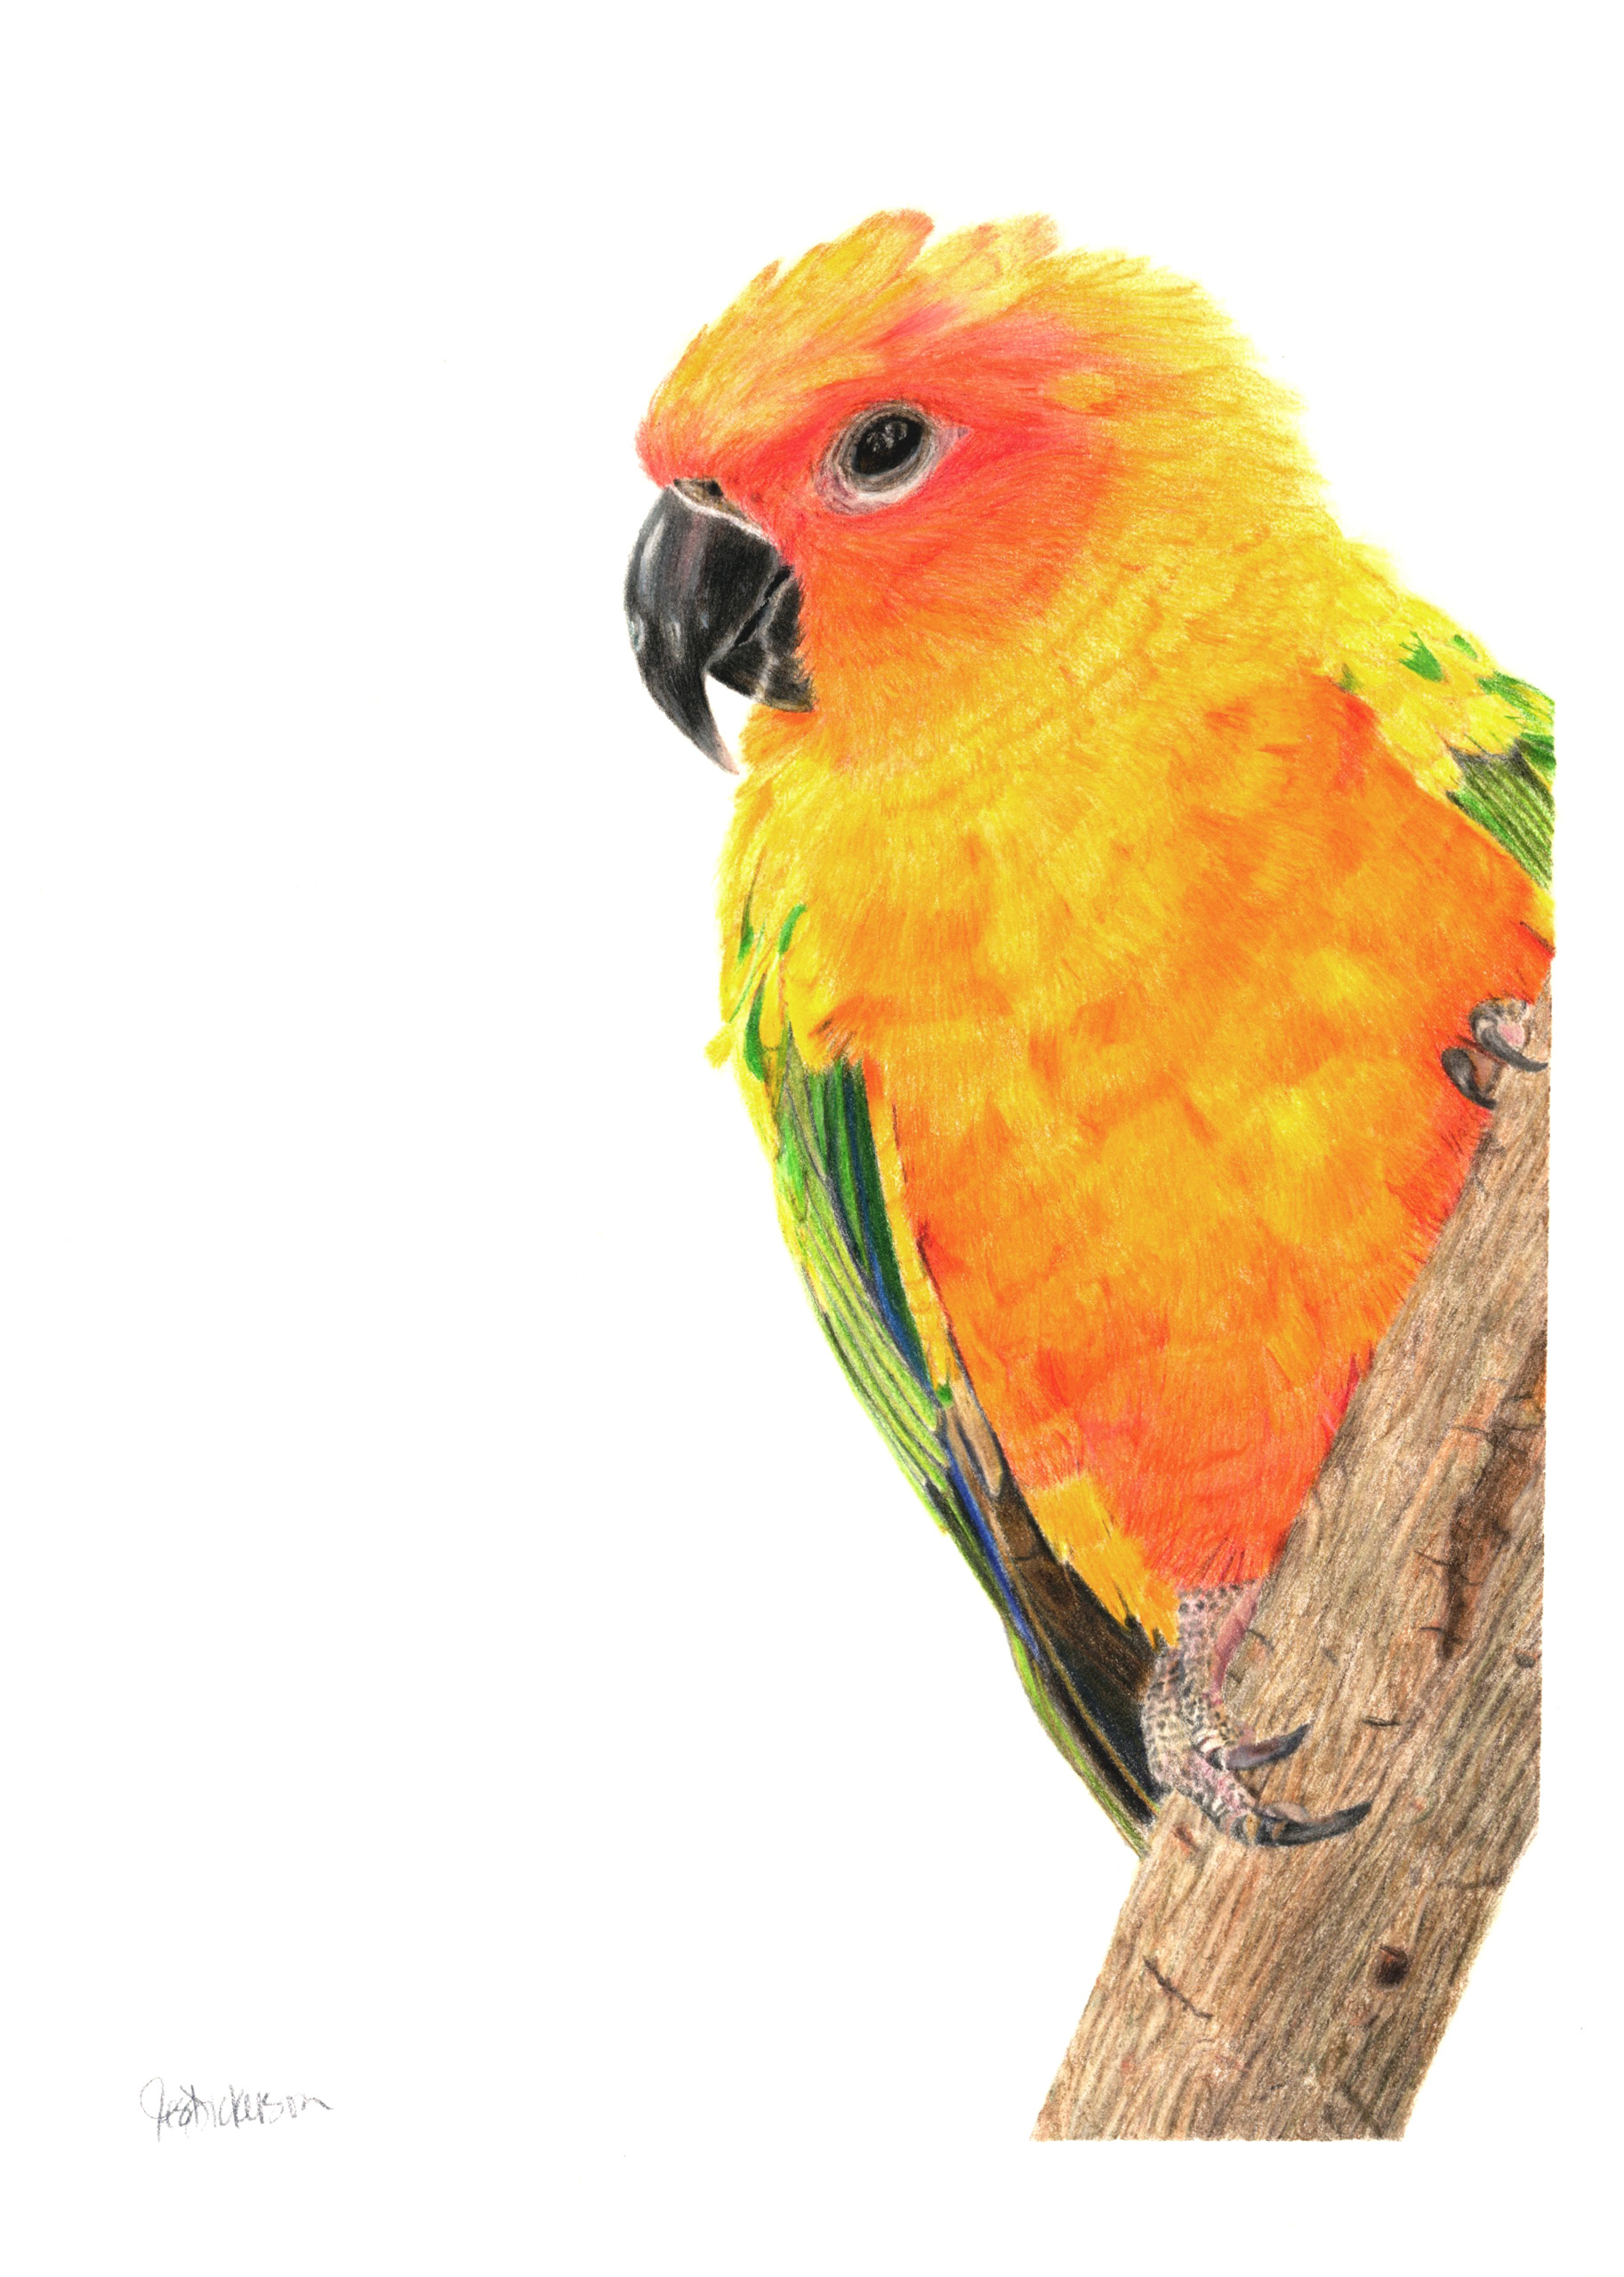 Colored pencil drawing of a sun conure by Jes Dickerson